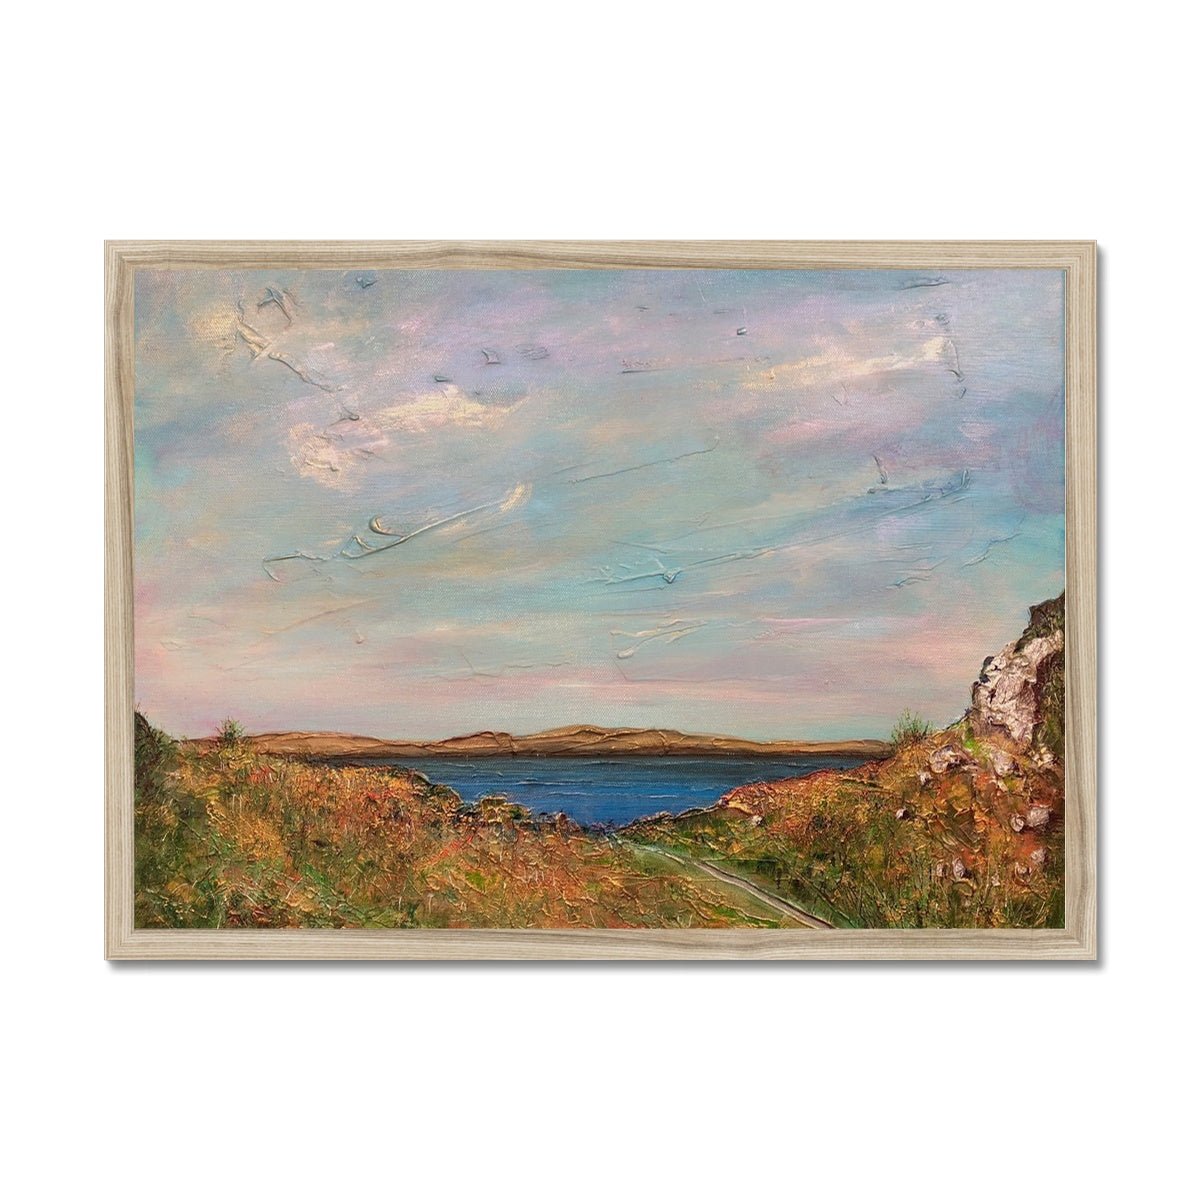 Jura From Crinan Painting | Framed Prints From Scotland-Framed Prints-Hebridean Islands Art Gallery-A2 Landscape-Natural Frame-Paintings, Prints, Homeware, Art Gifts From Scotland By Scottish Artist Kevin Hunter